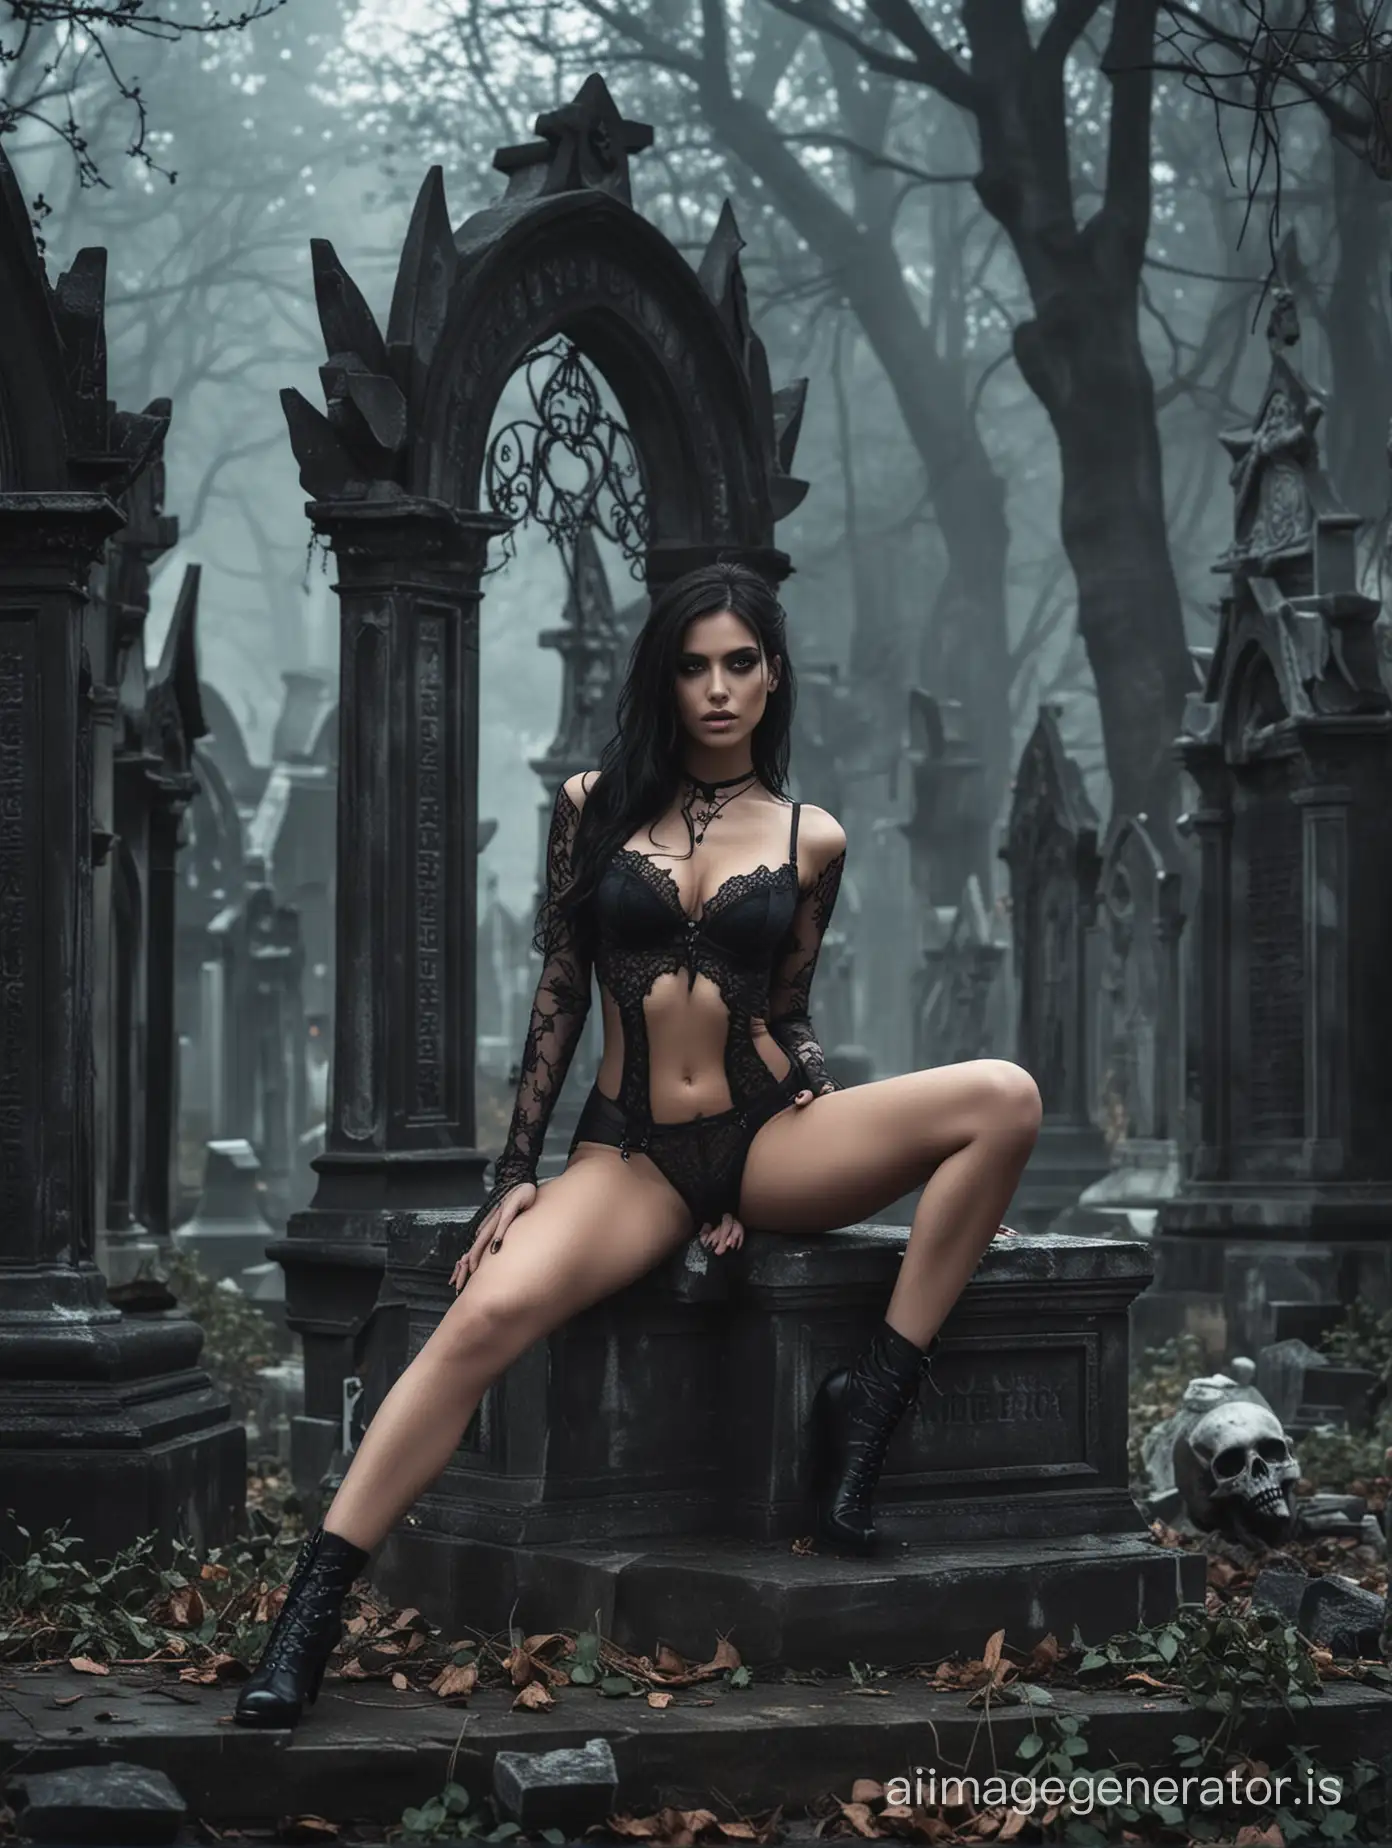 dark ghotic girl in lingerie with nice body proportion, sitting on her knee with a sexy temptation look on her face, she is beauitful and look like a victoria secret model, standing on a graveyard filled with demons behind her
